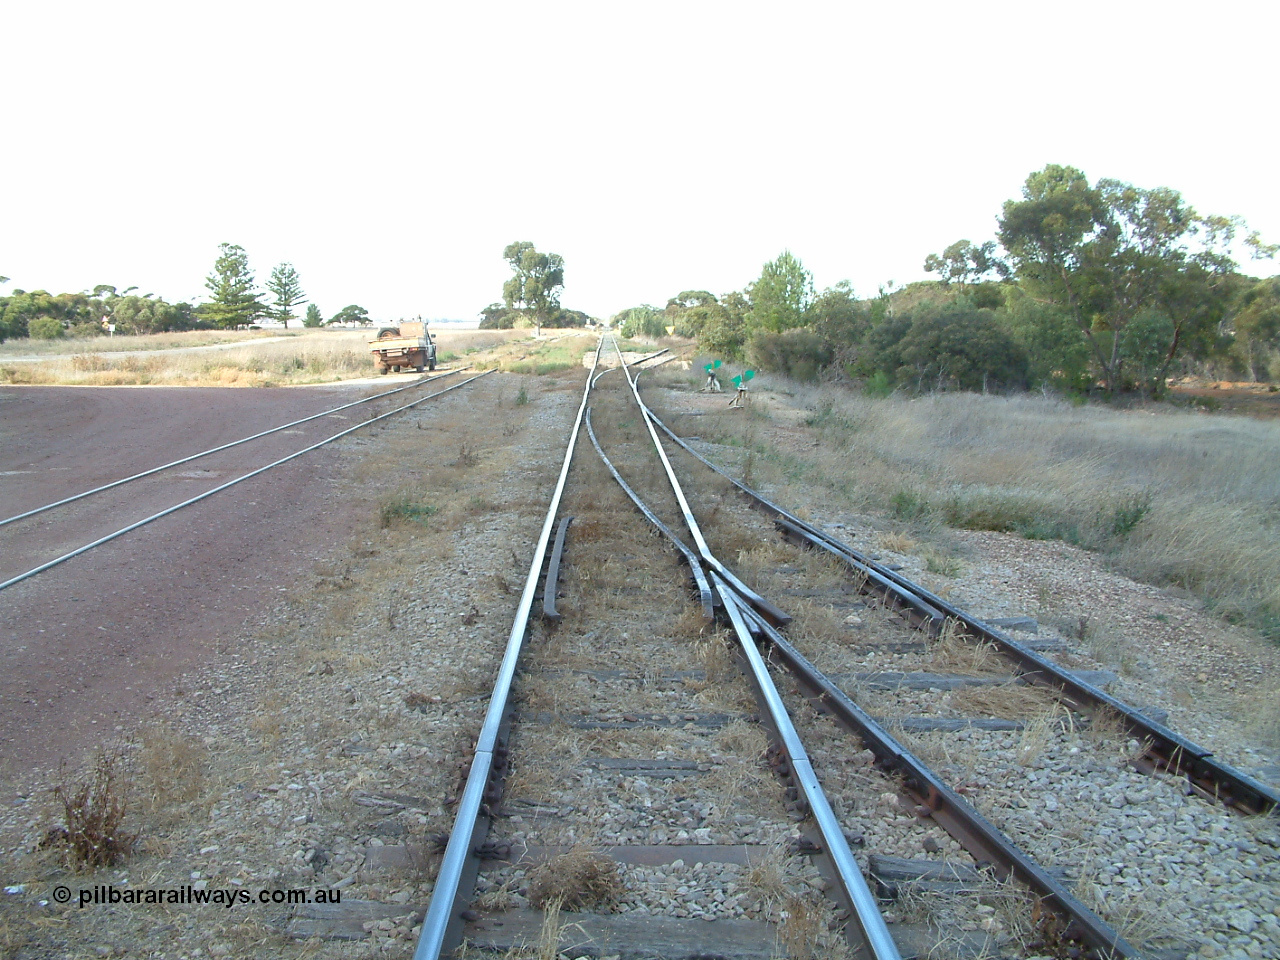 030406 092548
Yeelanna, yard view looking south along the mainline, with points and converging track from the station siding visible on the right, and the points, lever and indicator for the diverging line to Kapinnie and former Mount Hope branch curving to the right. 6th April 2003.
